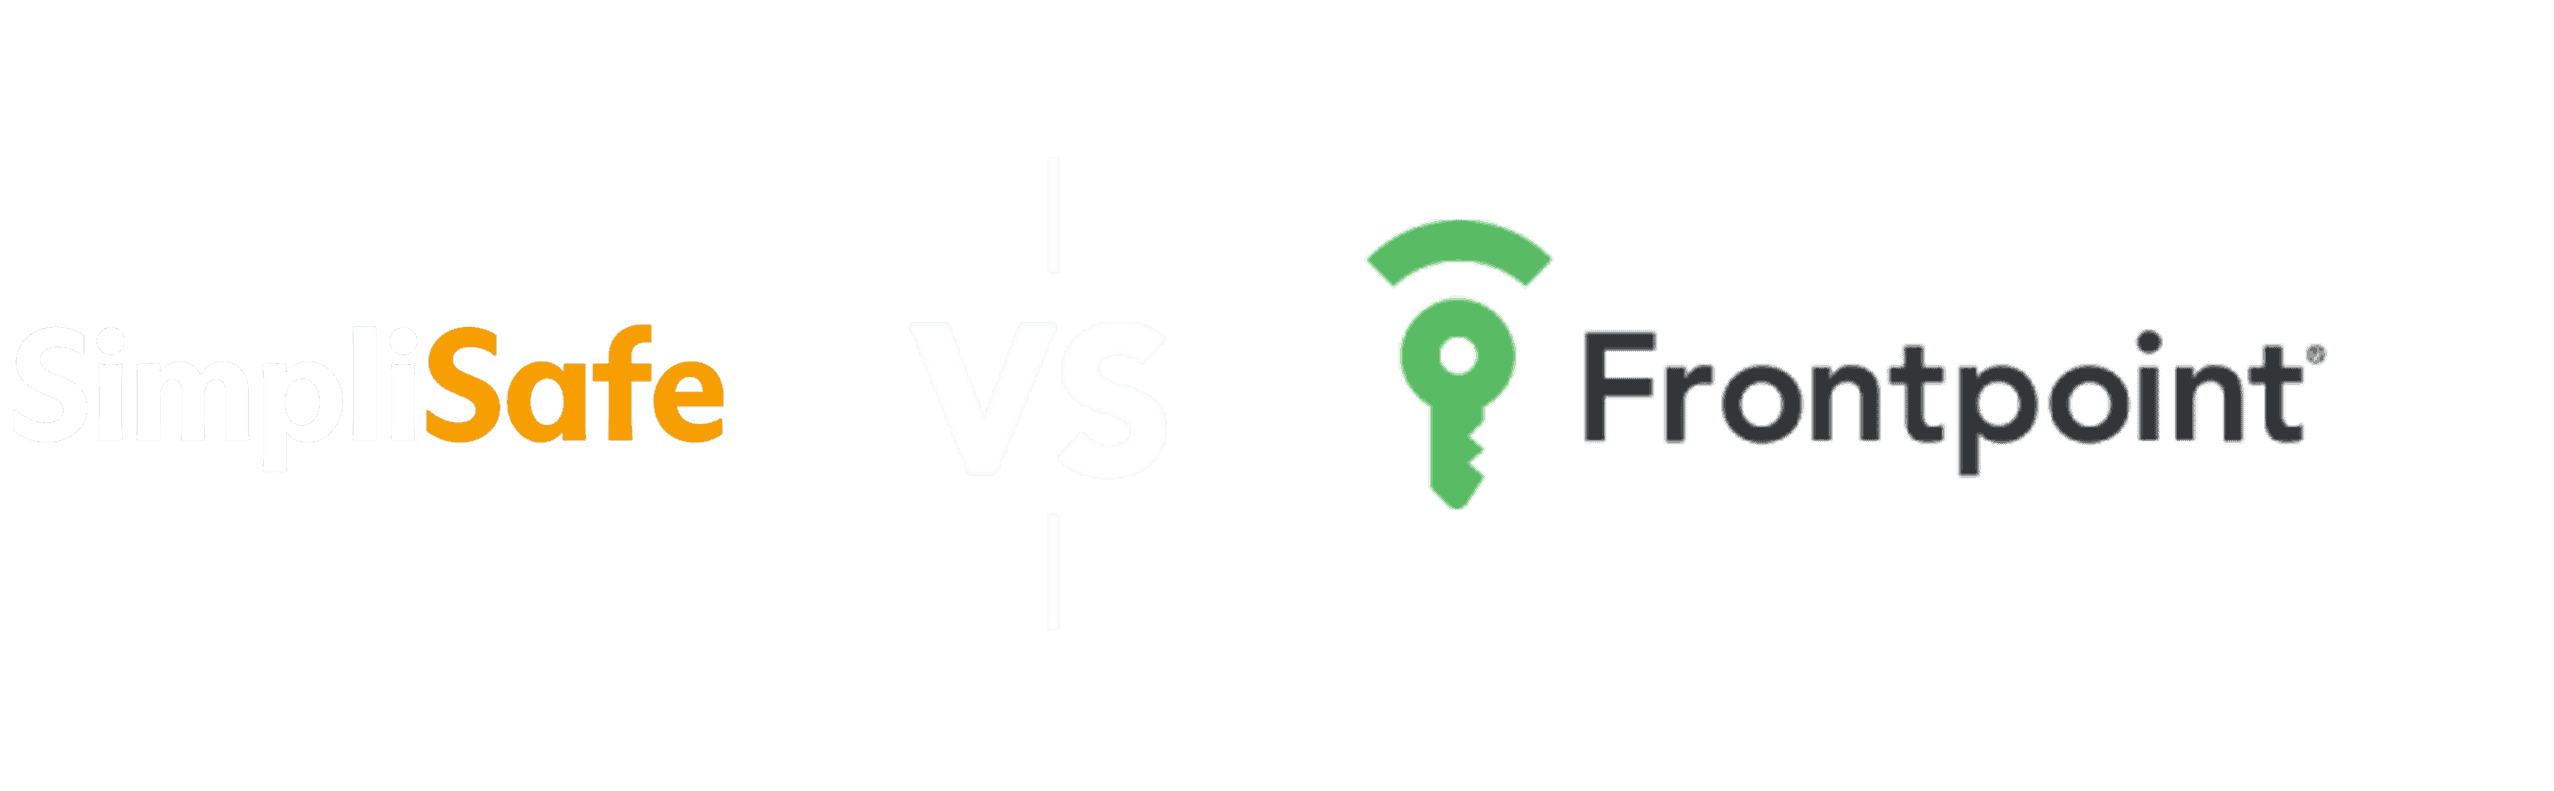 SimpliSafe vs Frontpoint: A Look at Two Excellent Home Security Systems